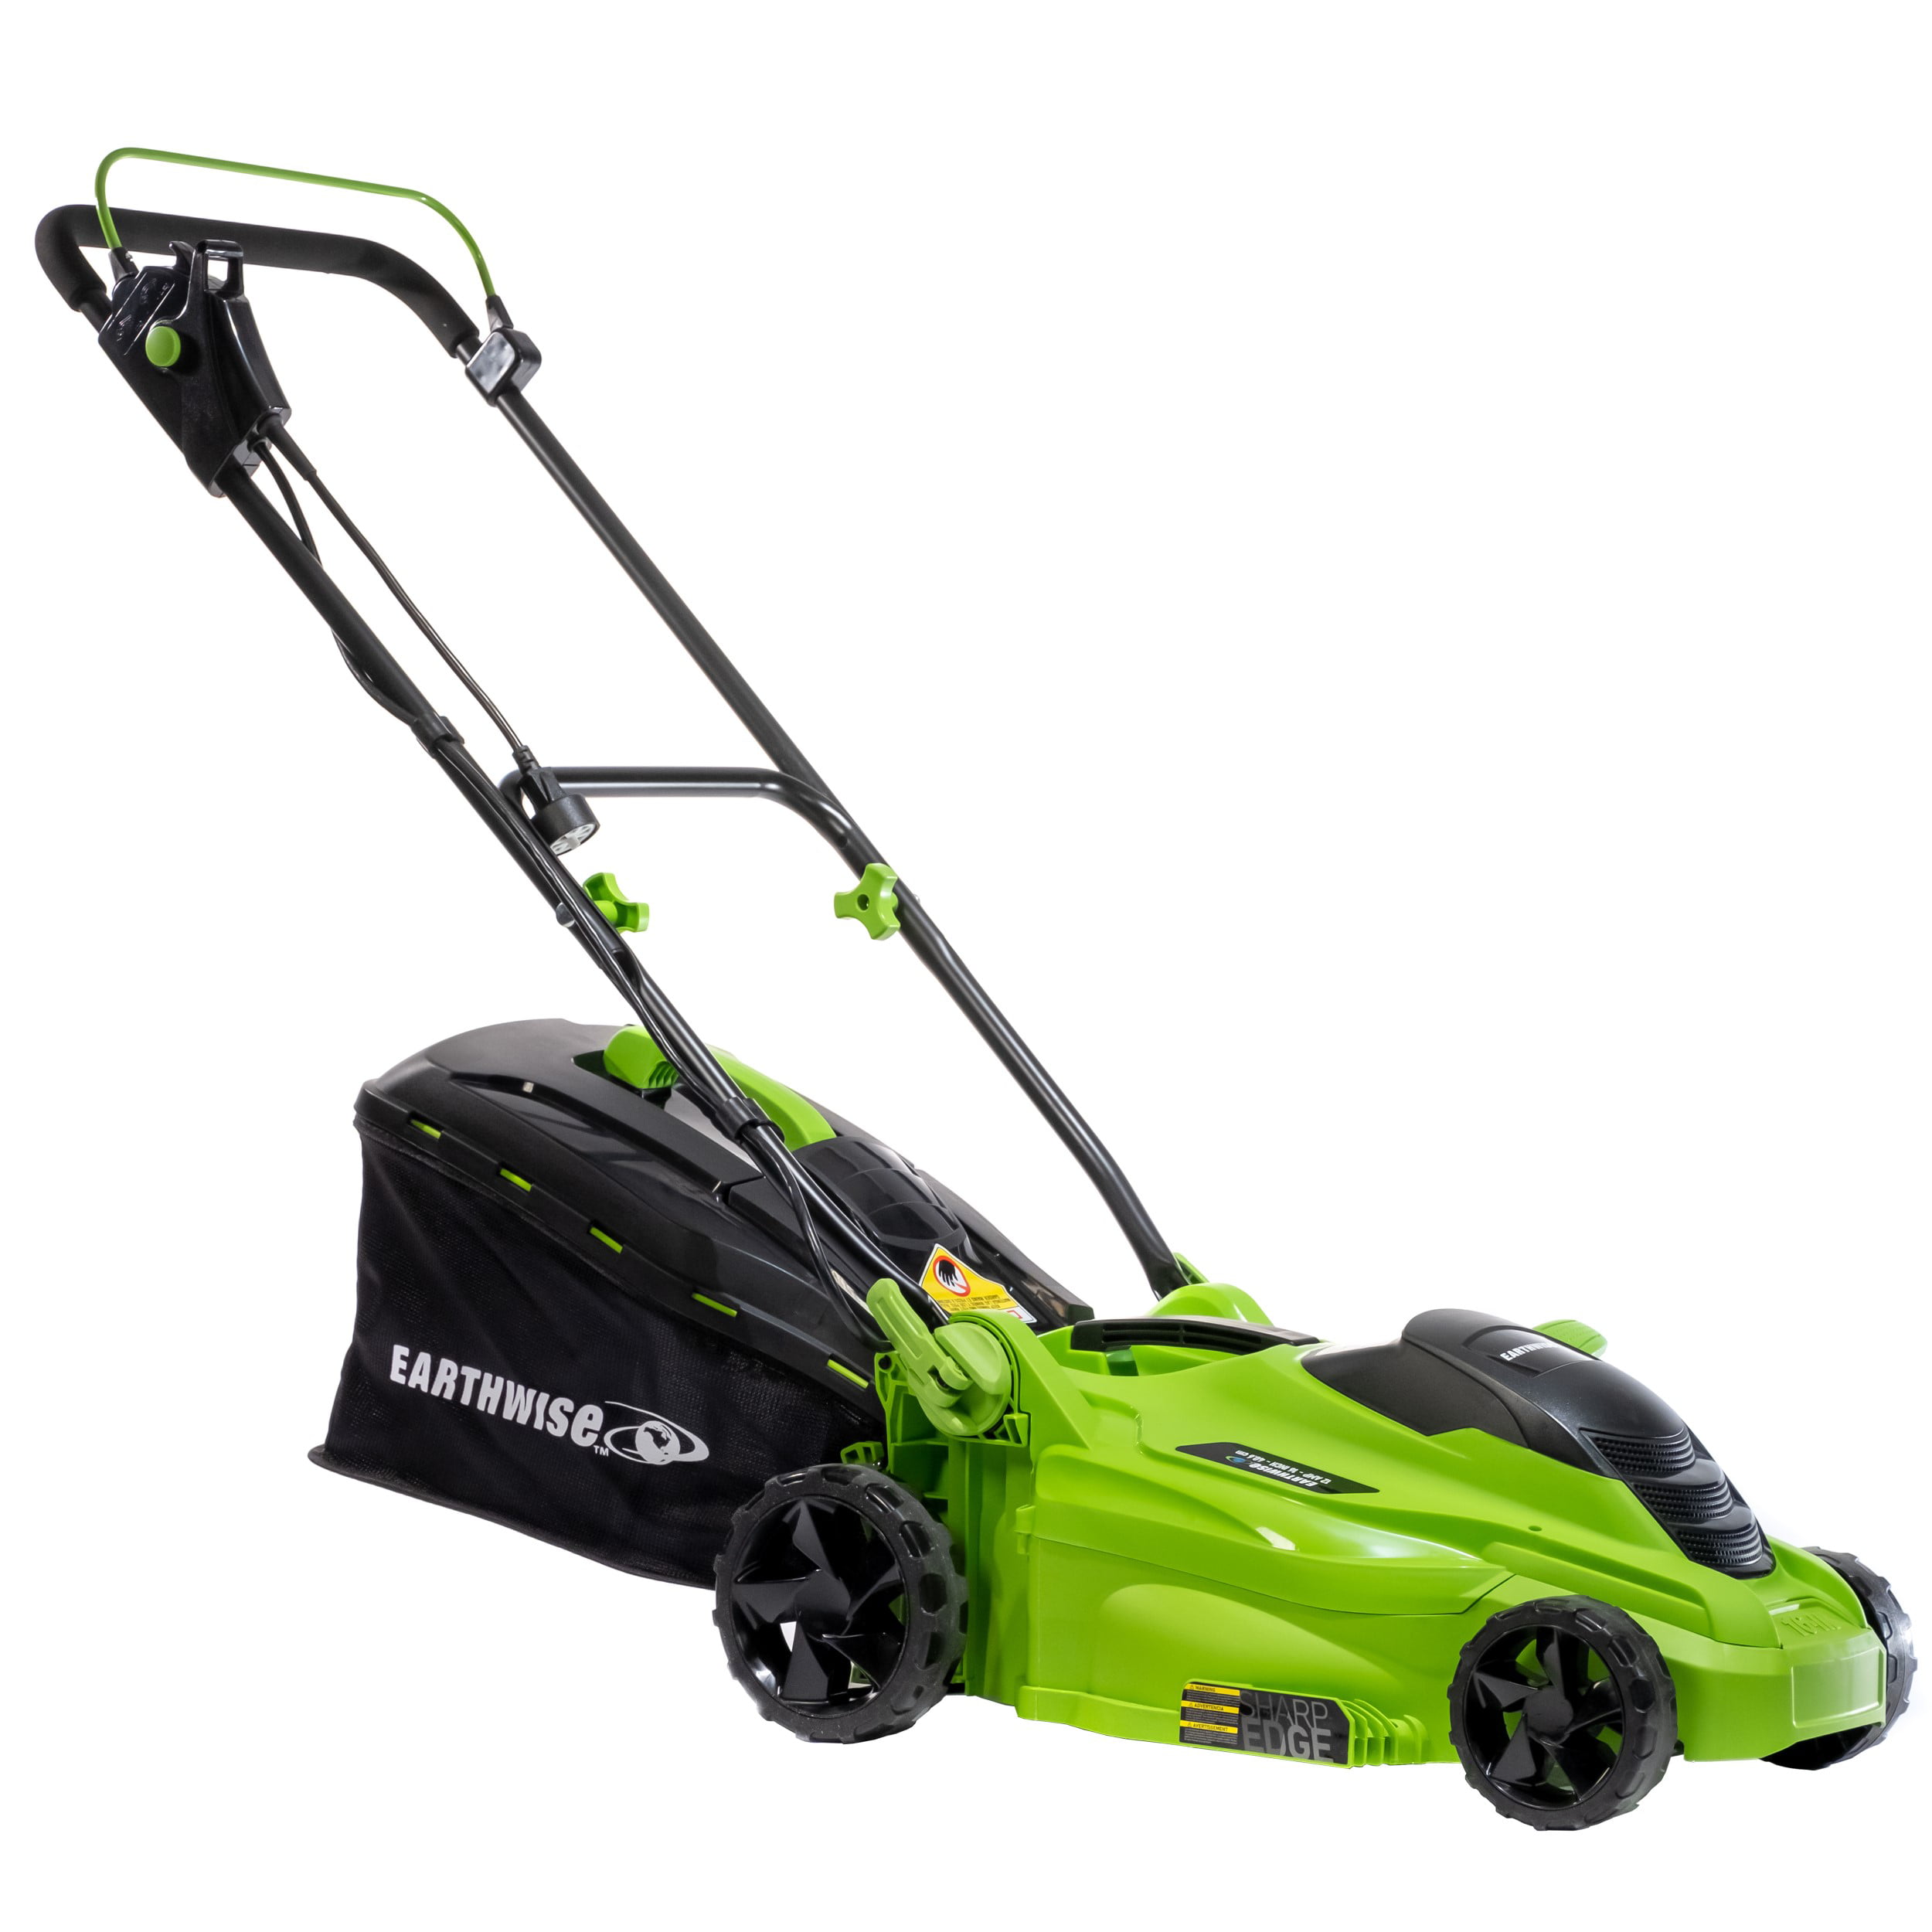 Earthwise 50616 16-Inch 11-Amp Corded Electric Lawn Mower - 1